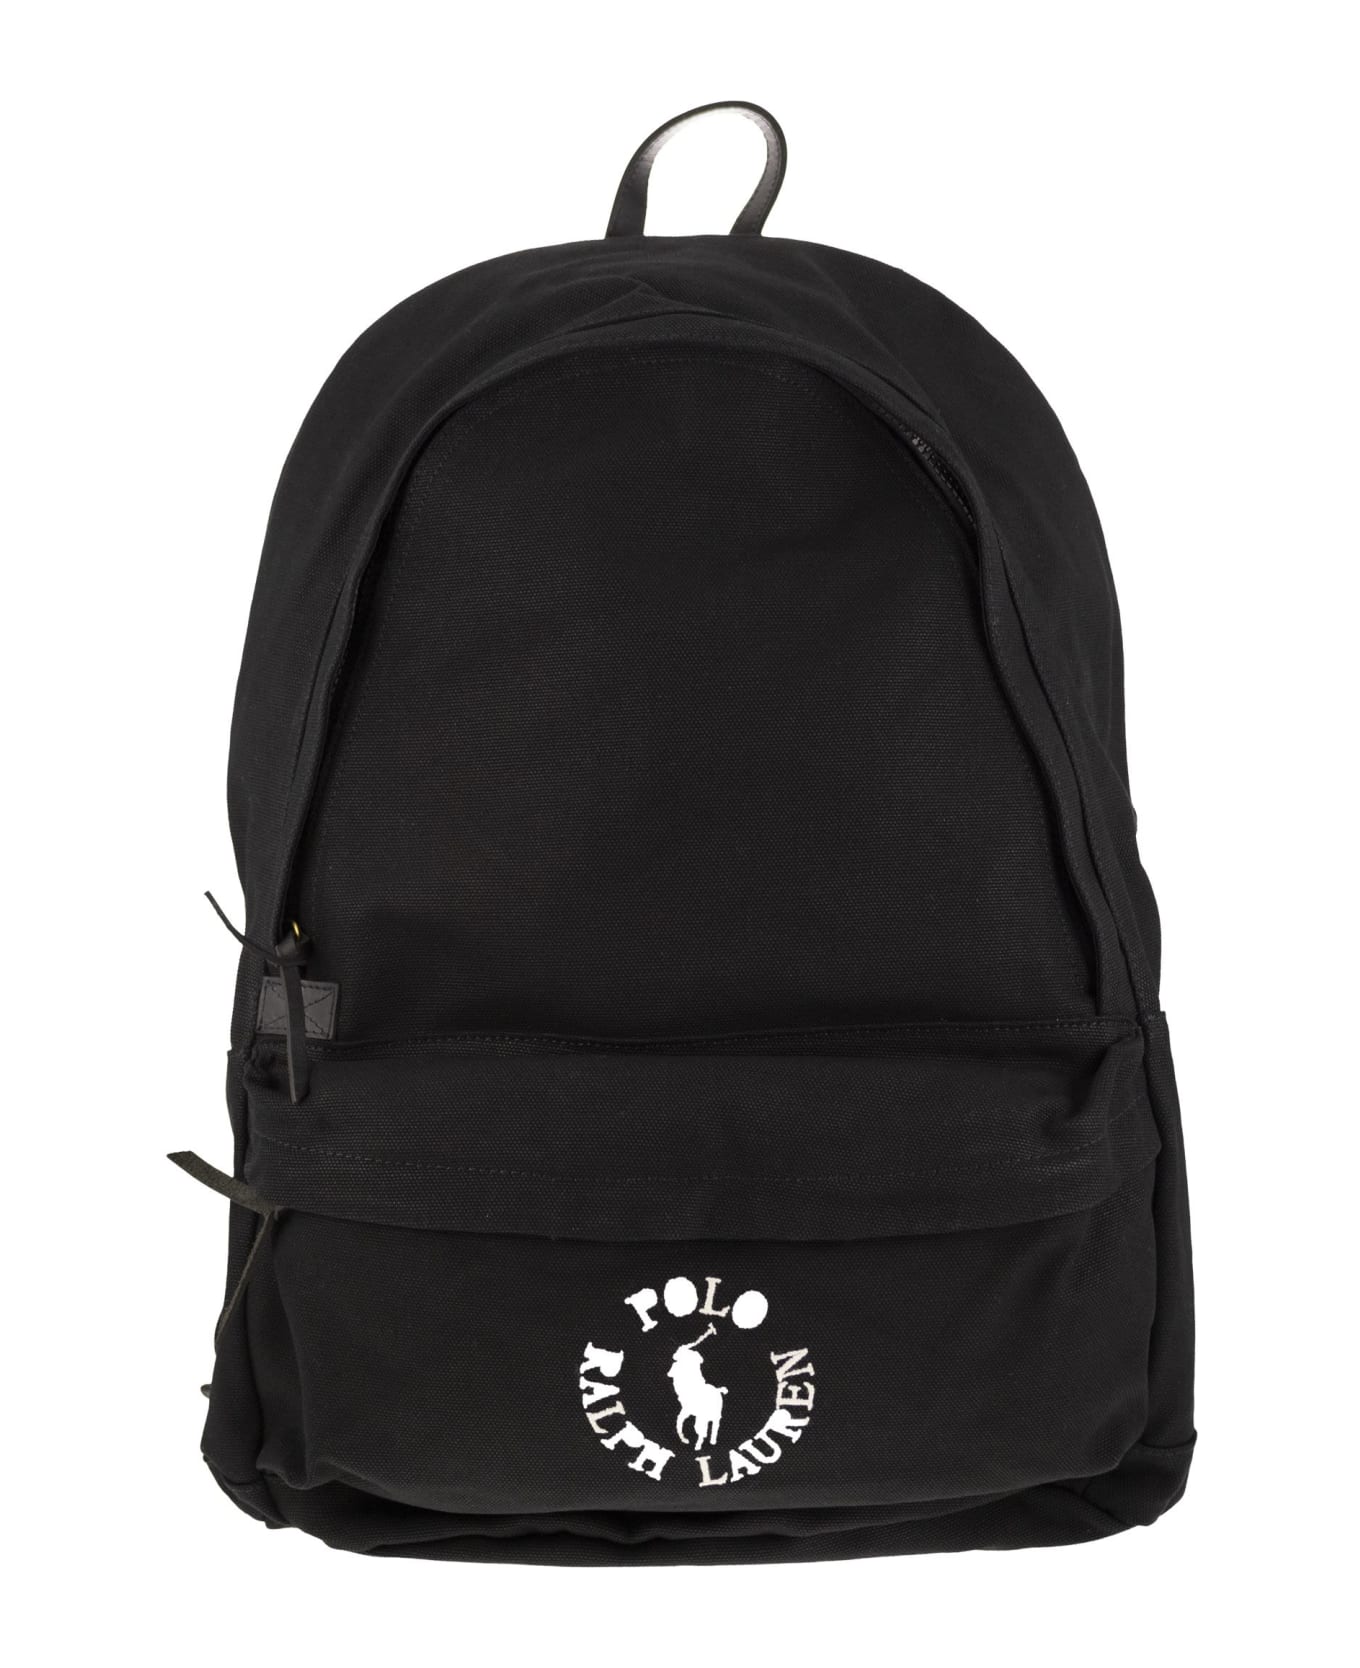 Polo Ralph Lauren Canvas Backpack With Embroidered Logo - Black